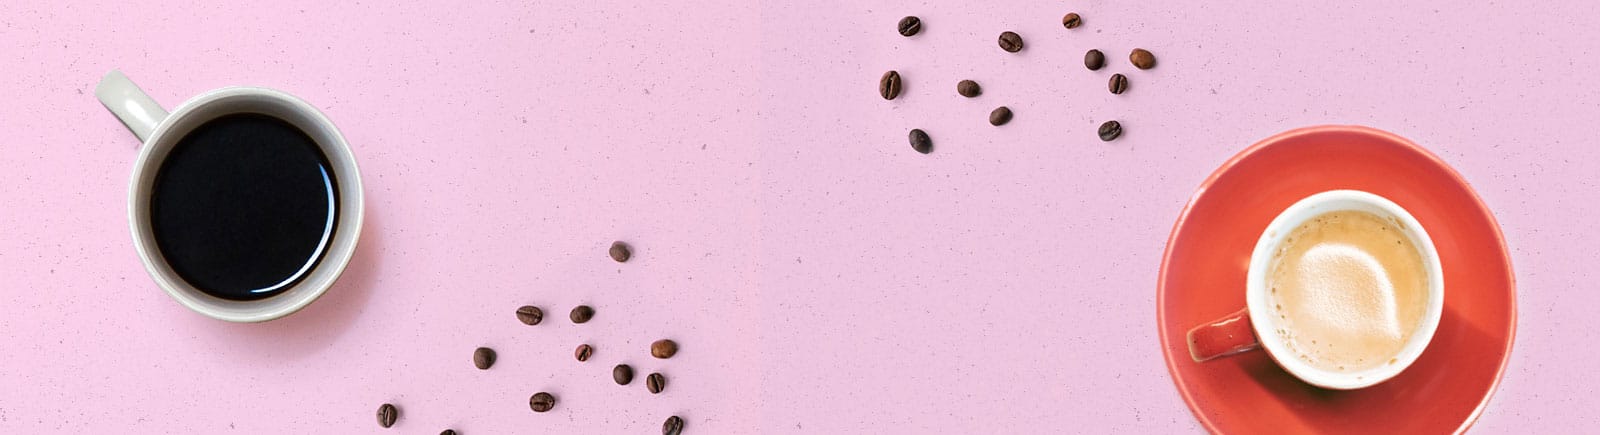 header image of a mugs of coffee and coffee beans